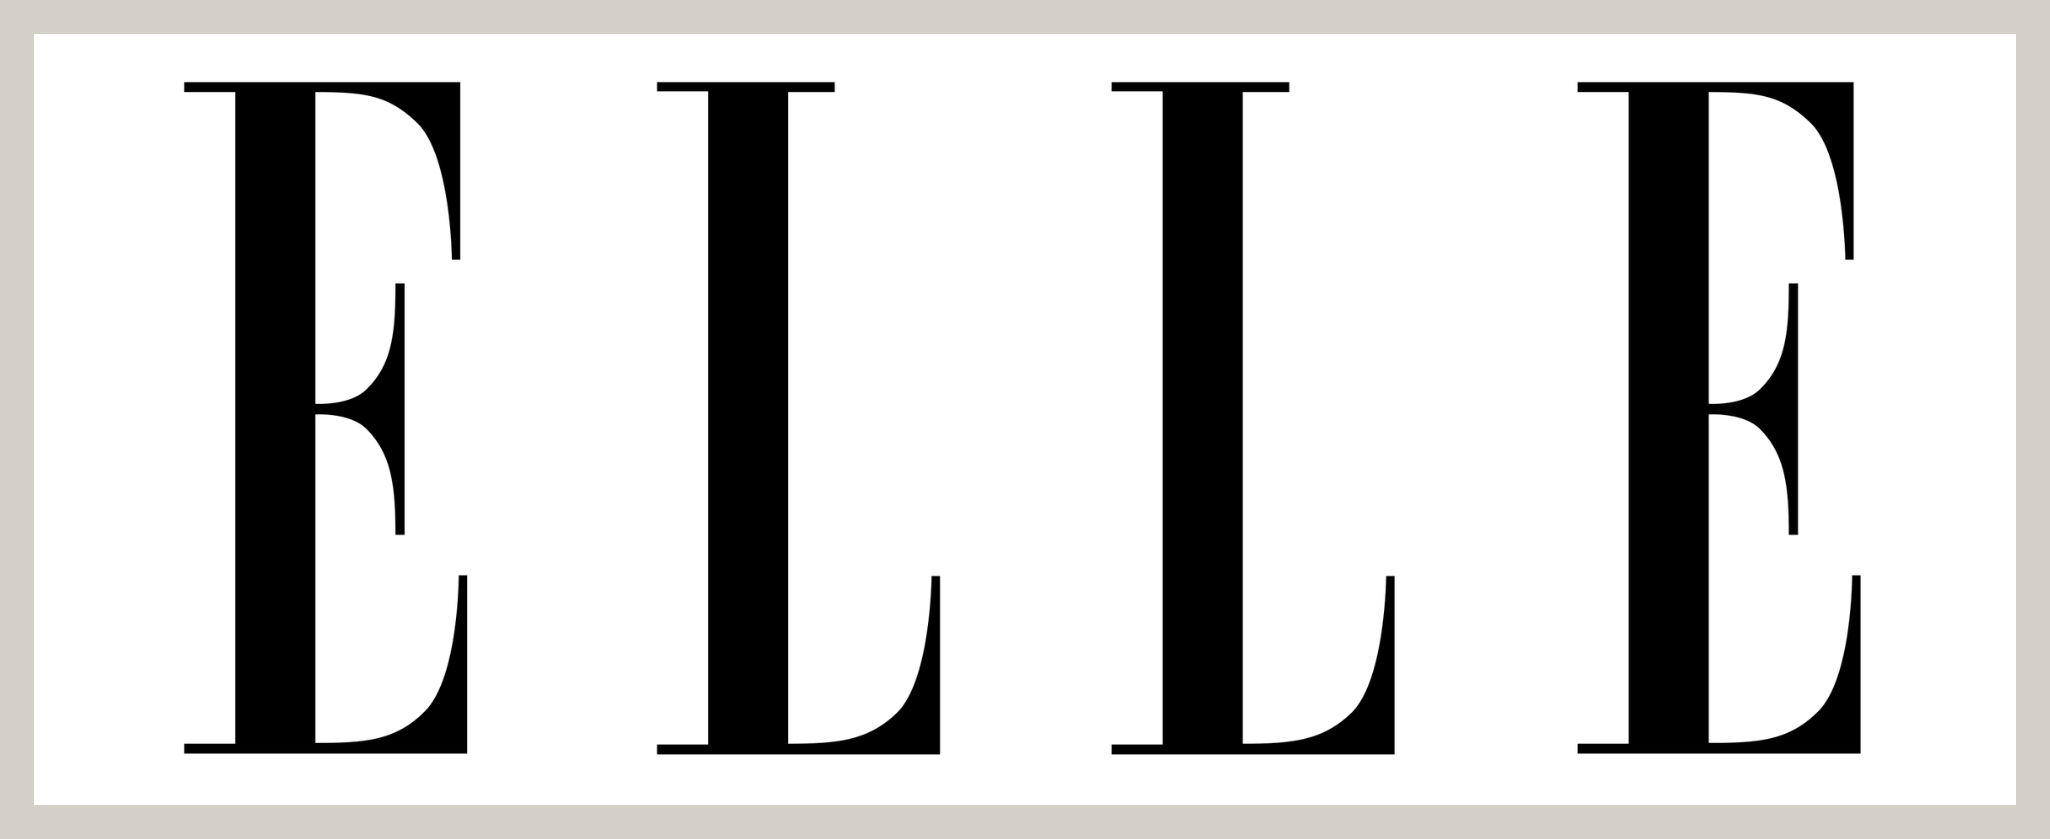 Black text "elle" in a bold, serif font on a light gray background.